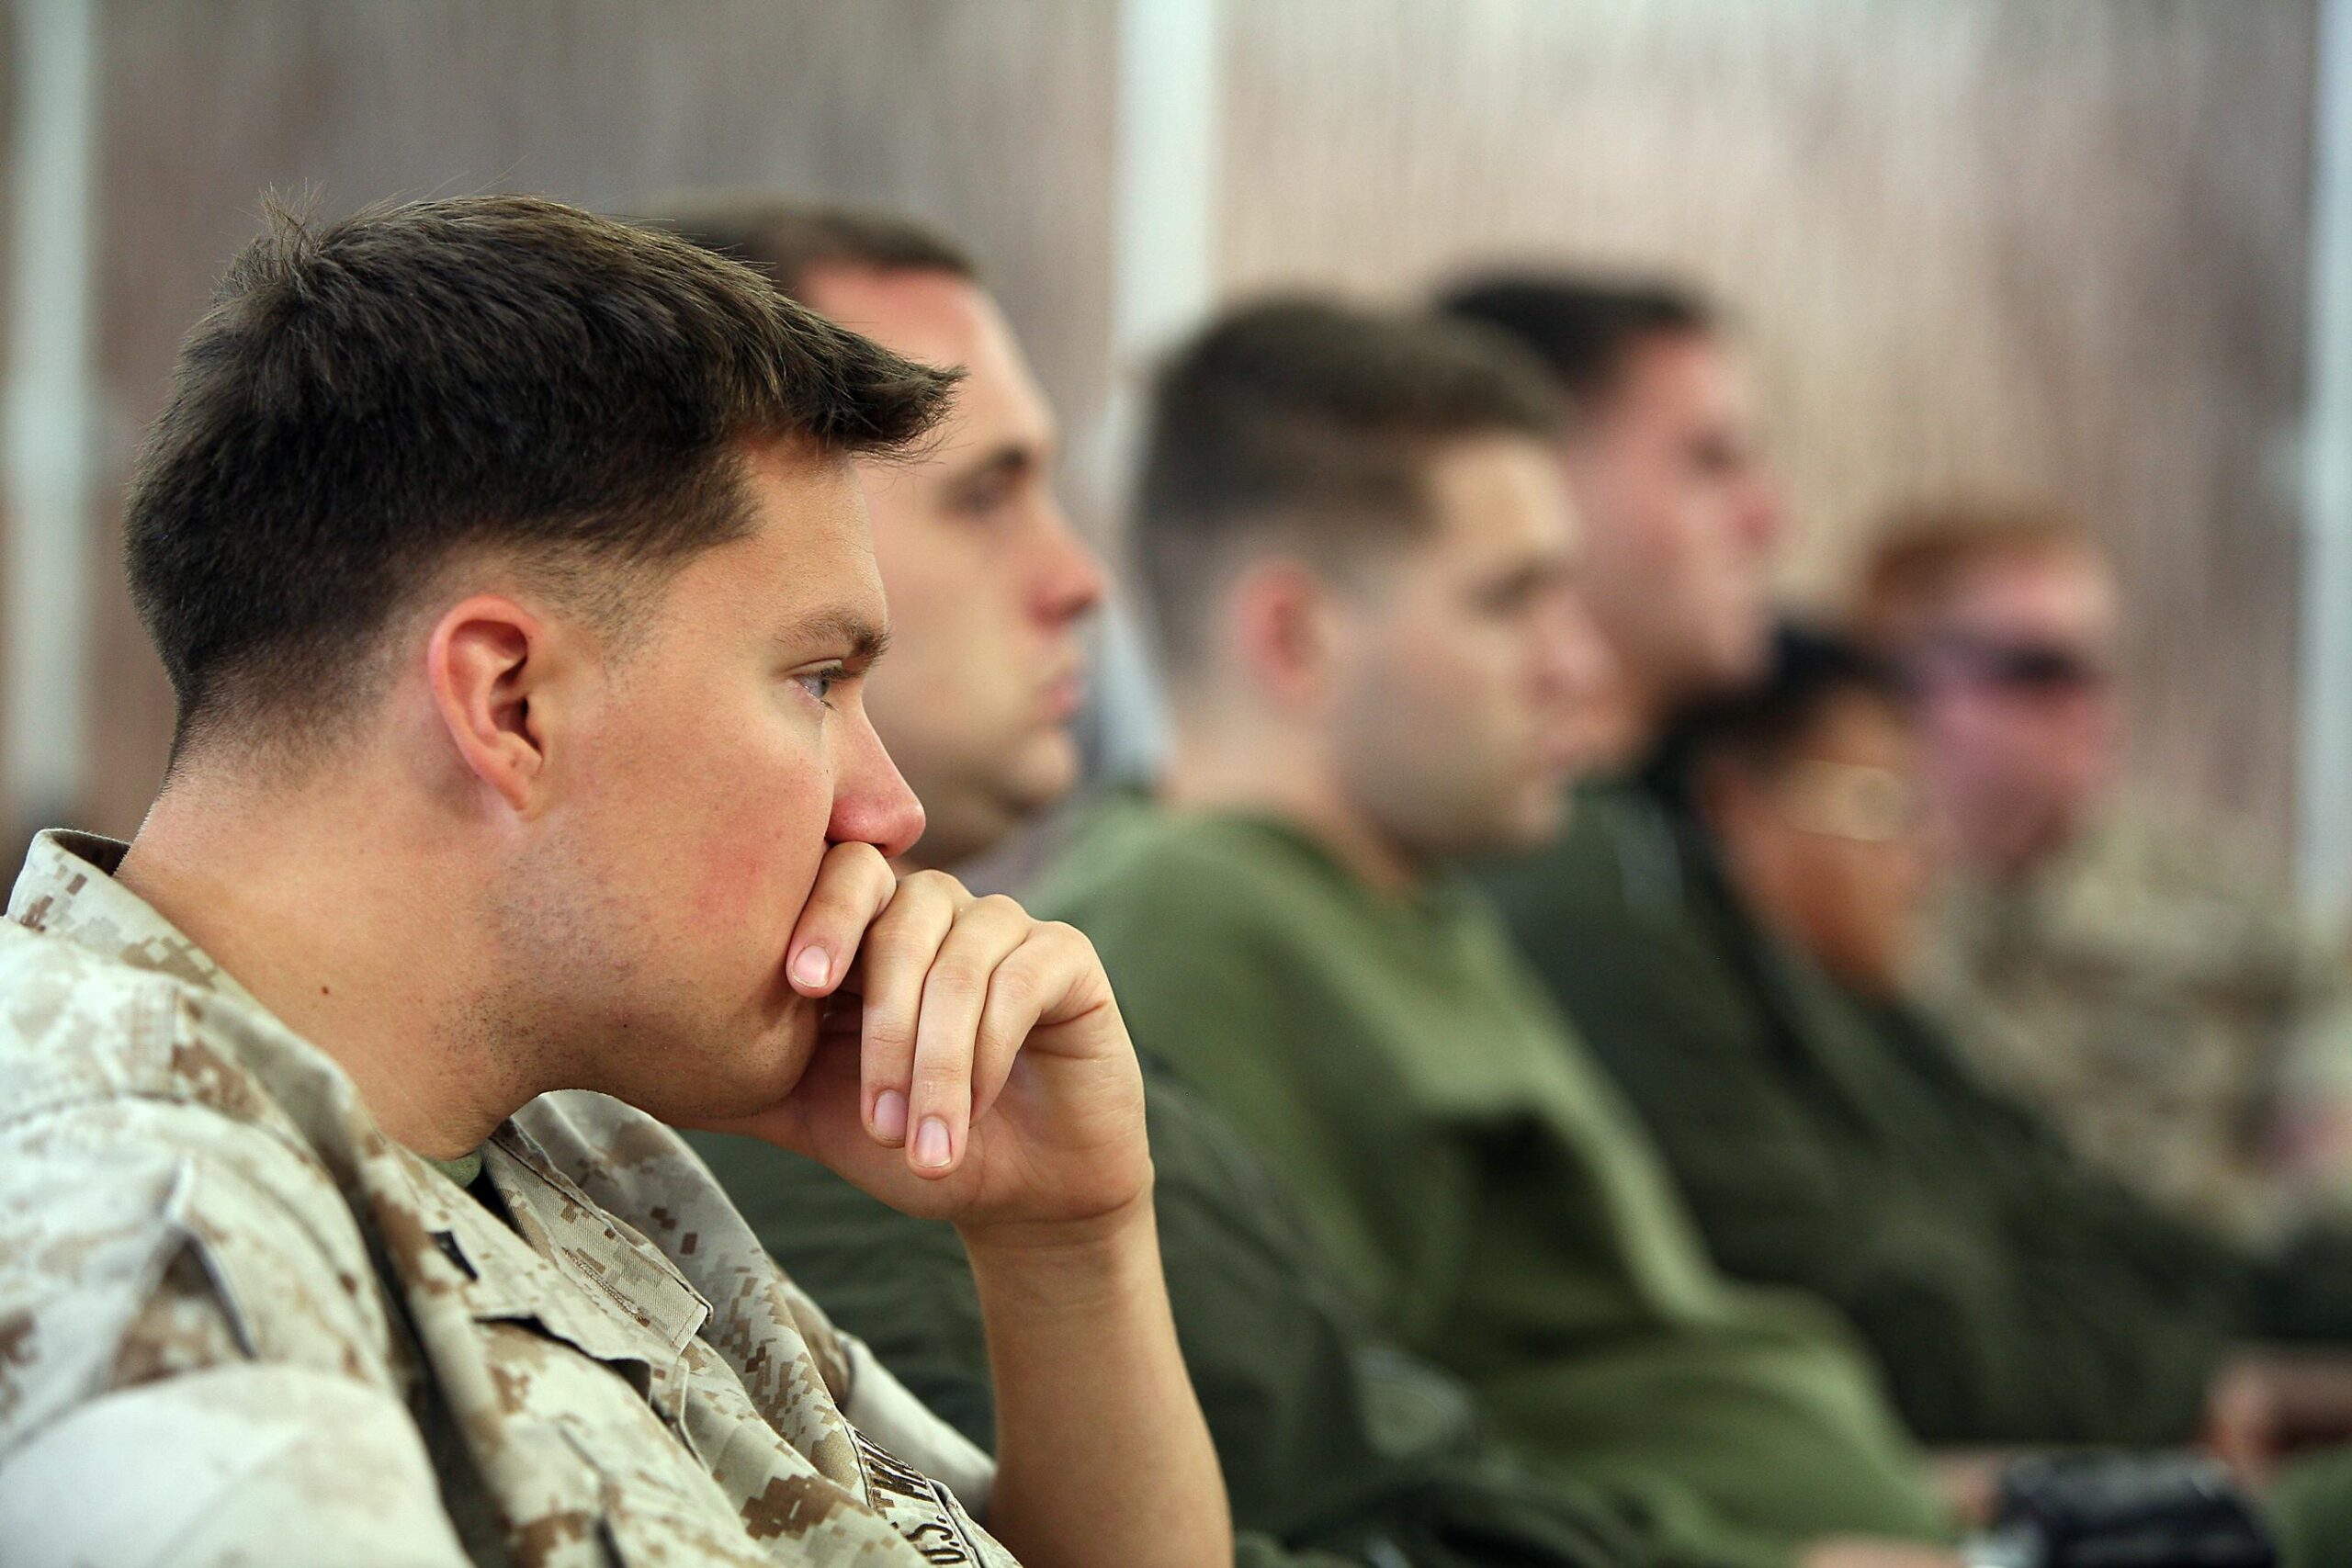 USC Study Reveals Insights into the Changing Needs of Southern California Veterans Transitioning to Civilian Life